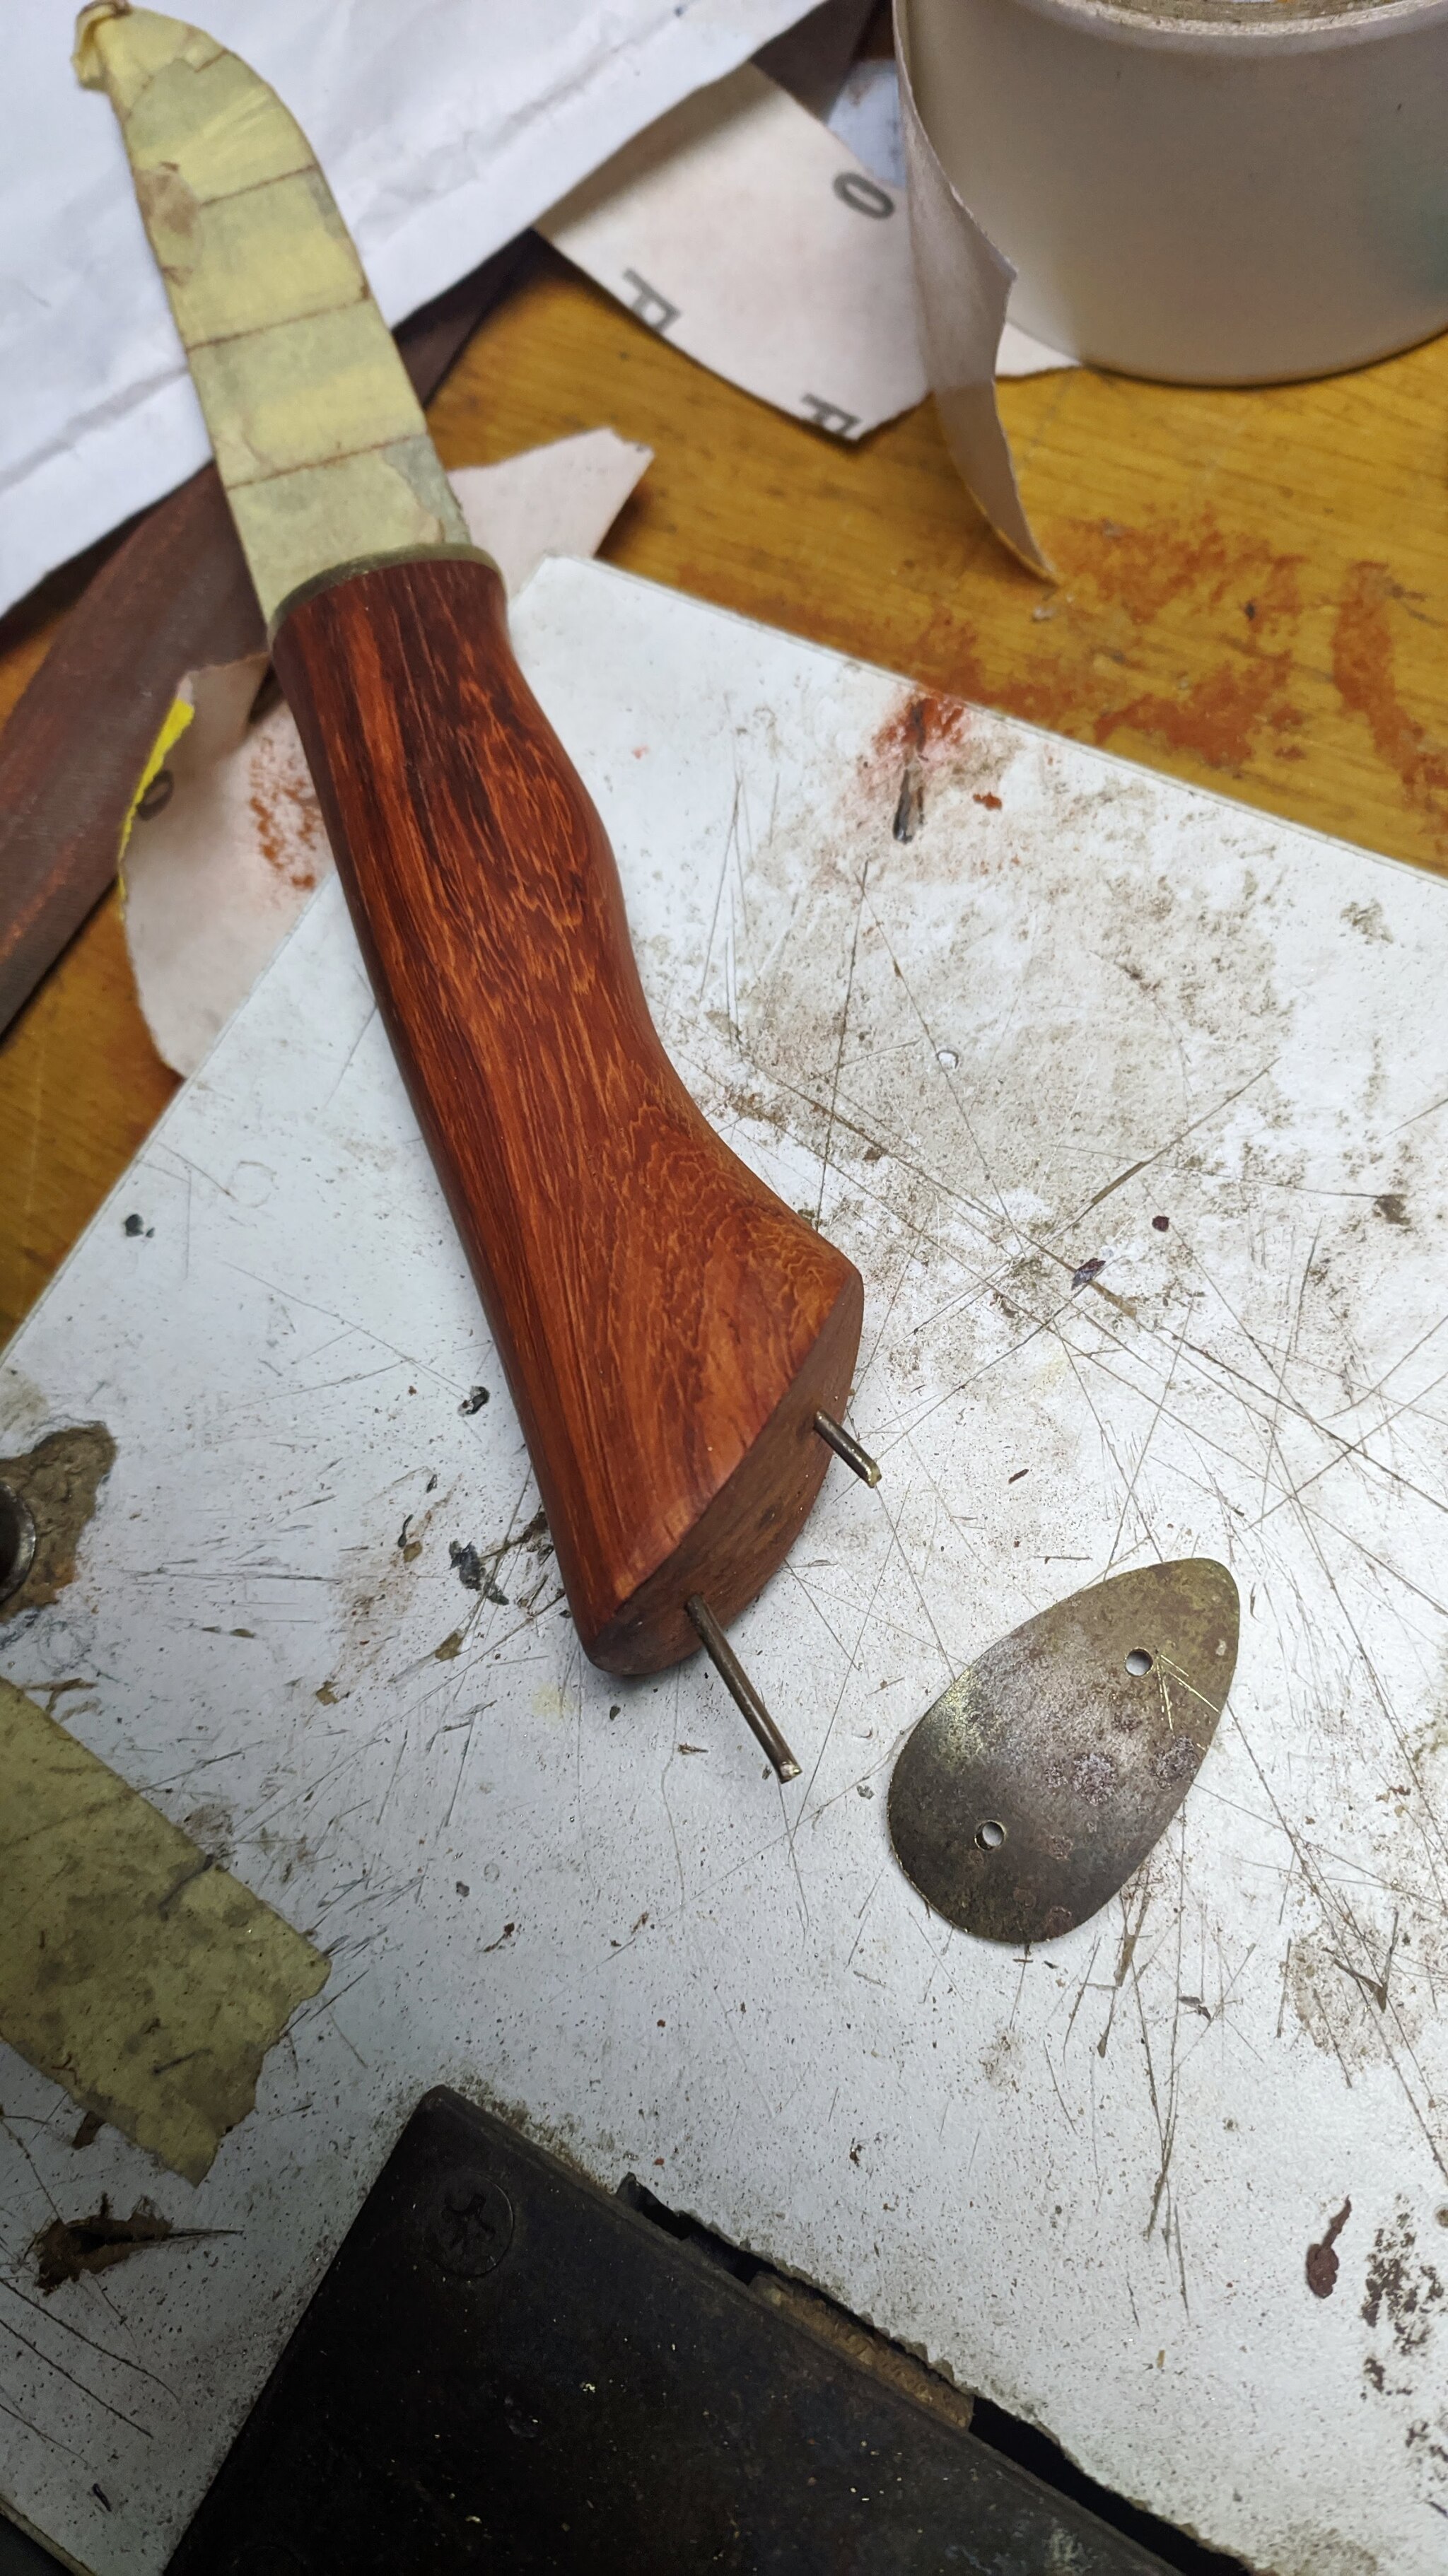 made a knife - My, Needlework with process, Knife, X12MF, Woodworking, Metalworking, Natural leather, Male, Knife makers, All beaver, Longpost